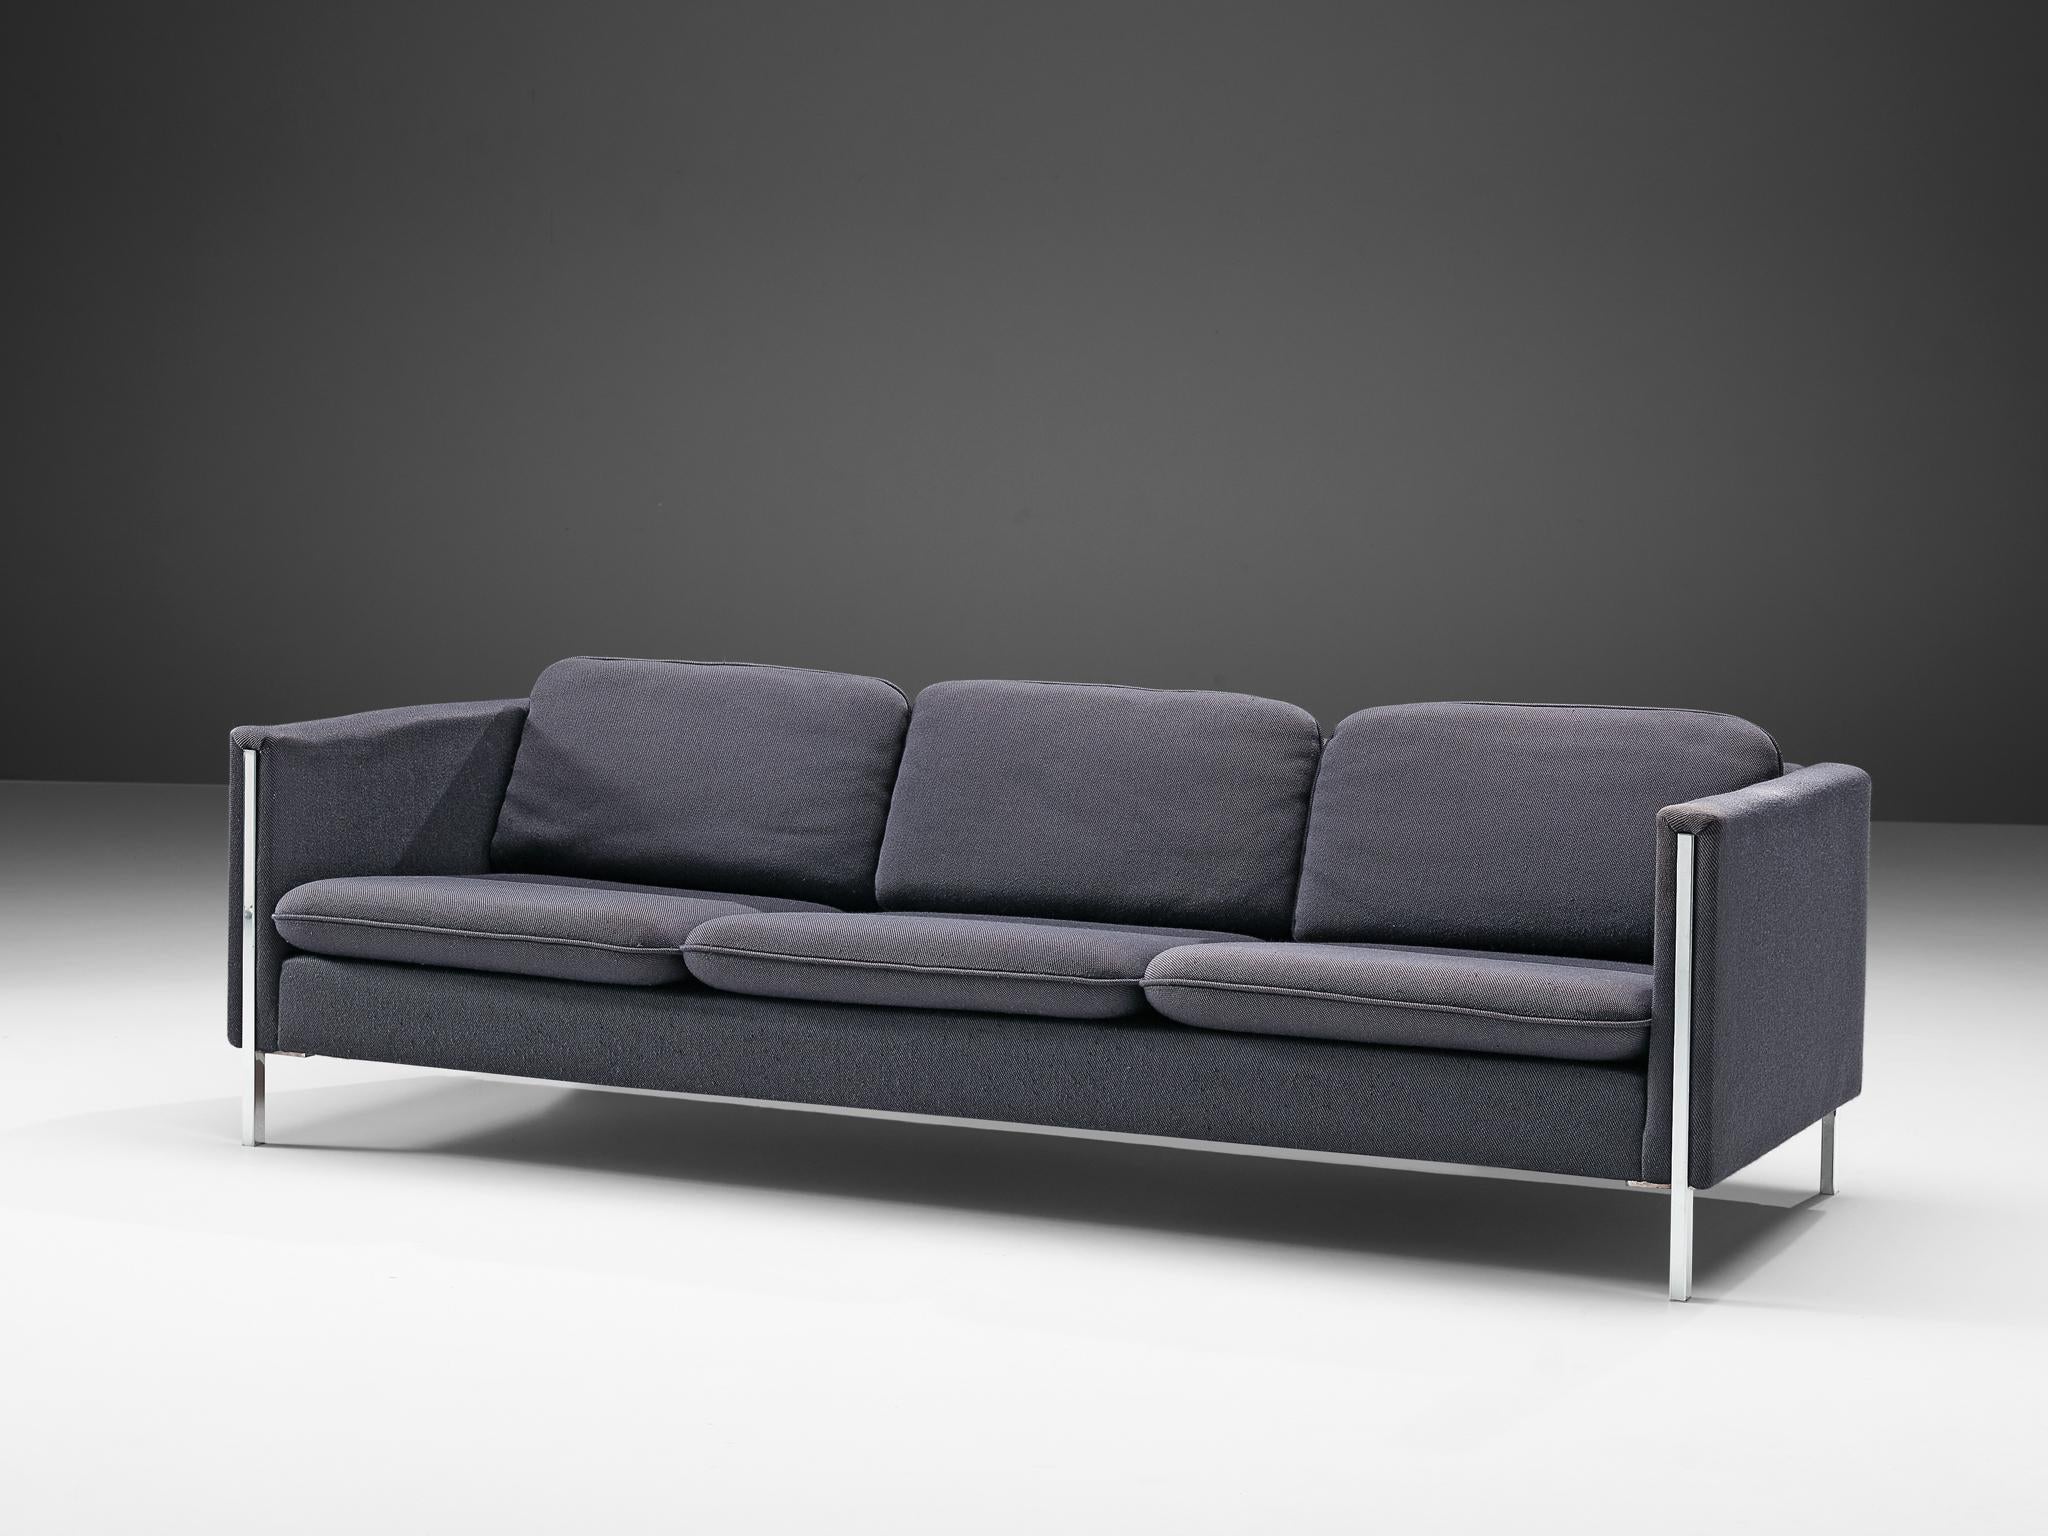 Pierre Paulin for Artifort, sofa model '442/3', fabric upholstery, chromed steel, The Netherlands, 1962

This modest sofa is based on a solid construction featuring clear lines and geometrical shapes executed in a subtle way. The seat is supported